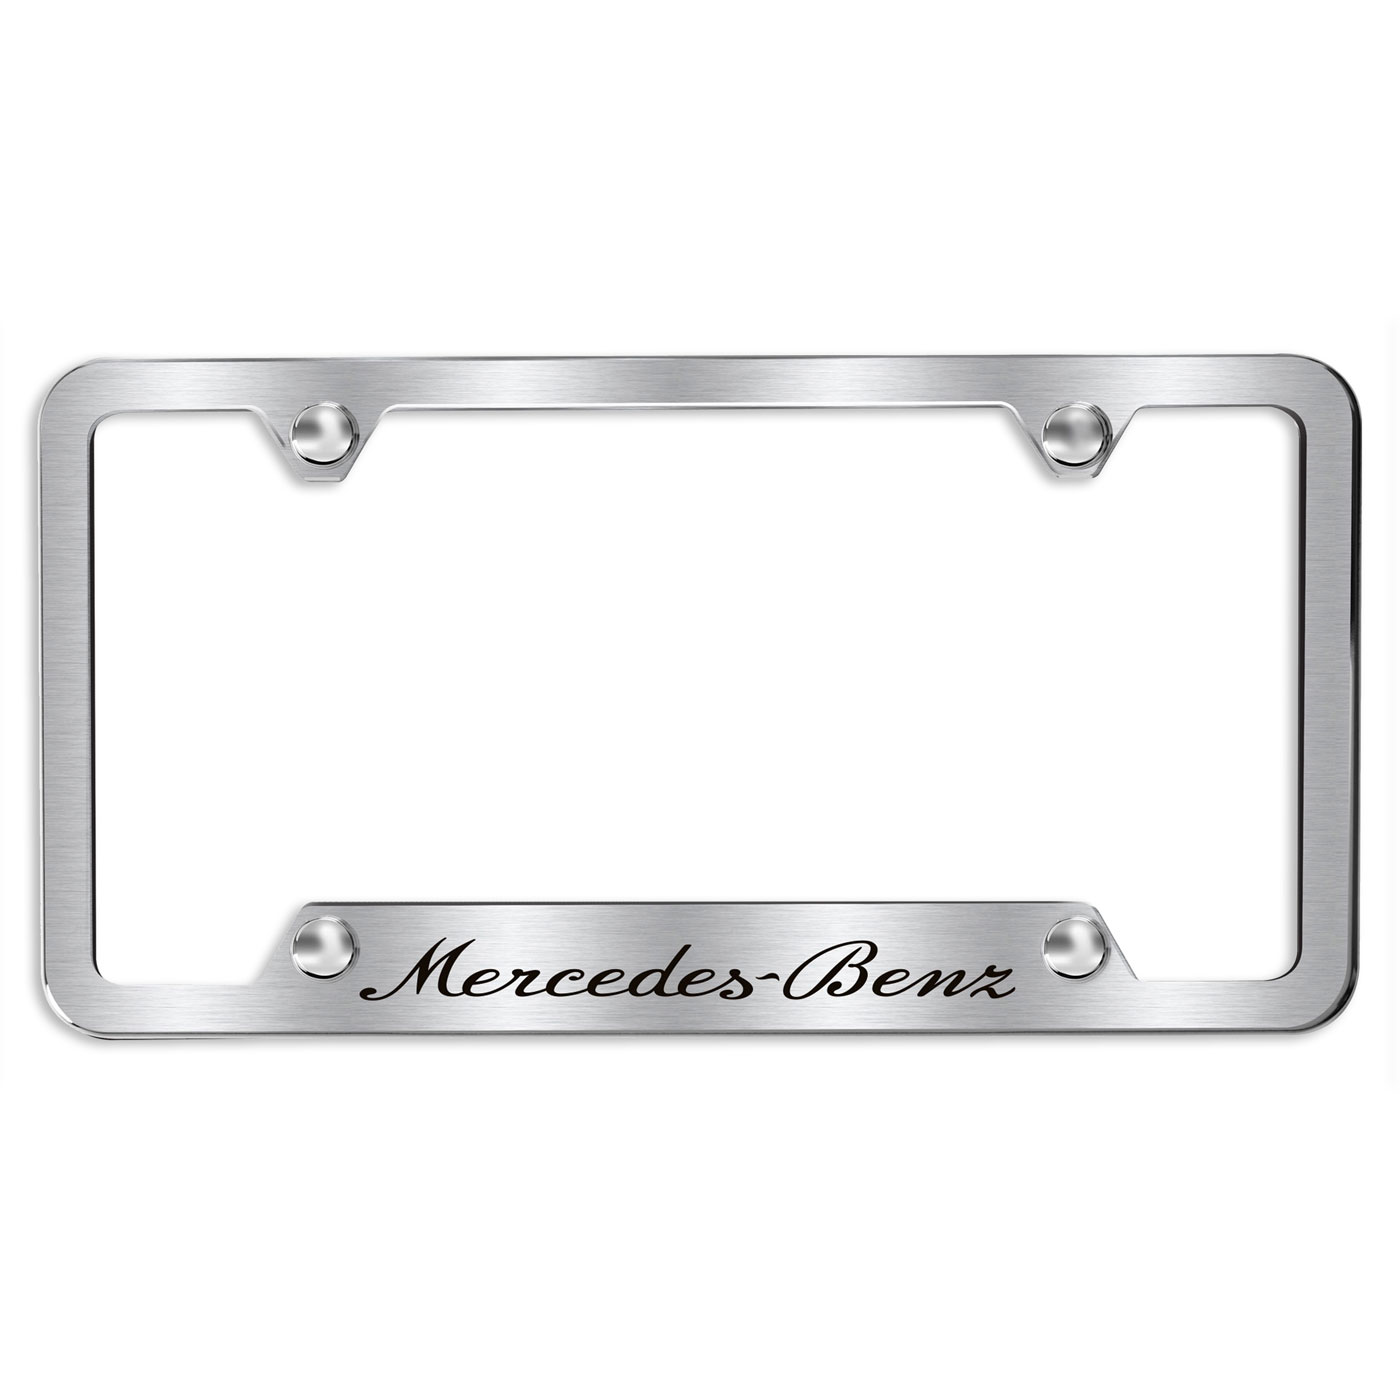 Stainless Steel Chain Style License Plate Frame